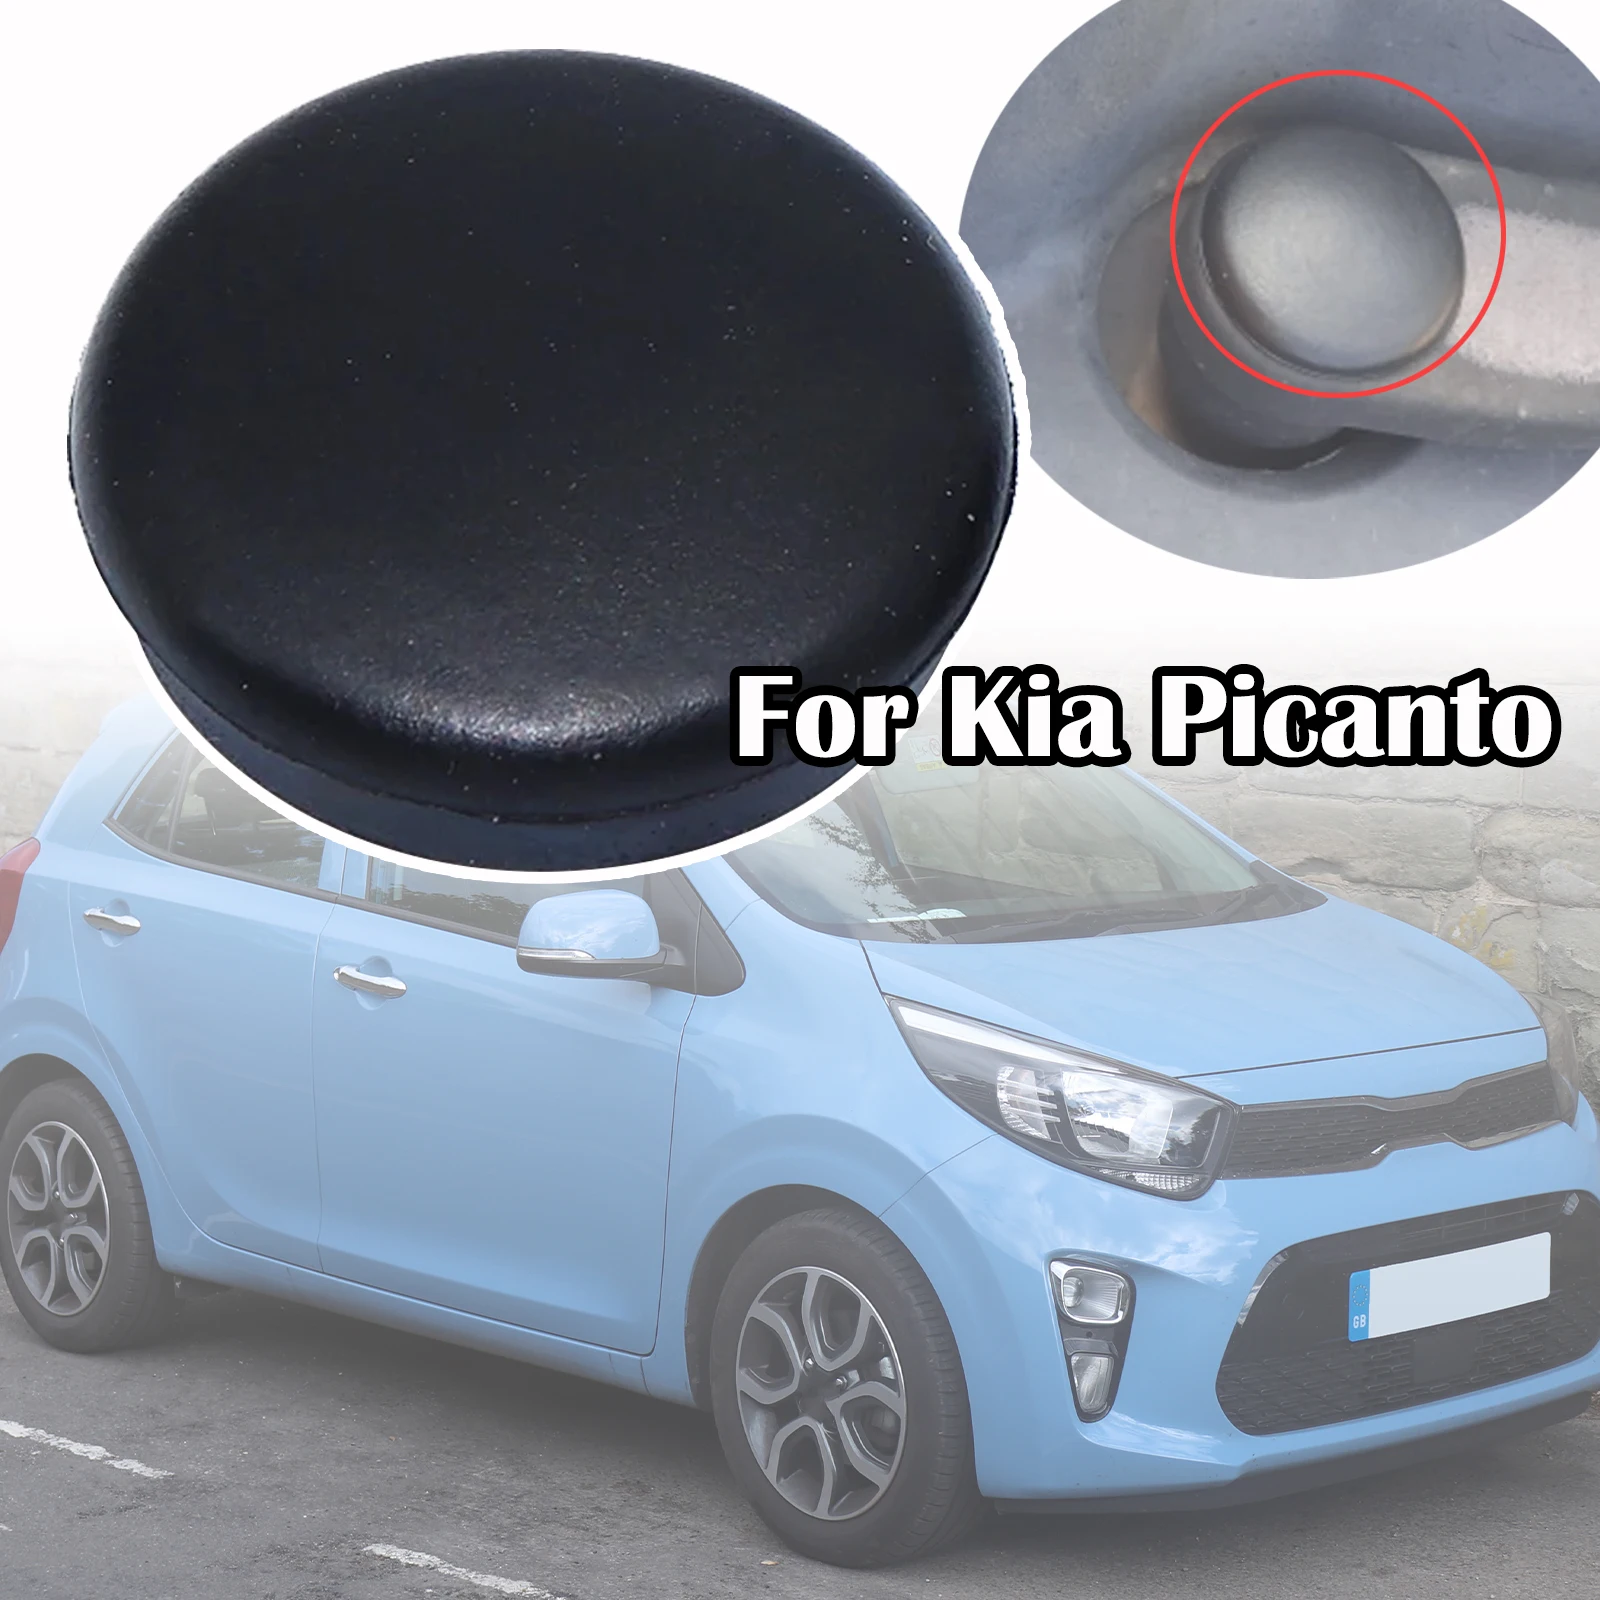 

1X For Kia Picanto Morning Eko Taxi Suria Windshield Arm Cap Front Wiper Nut Cover Bolt Anti-rust Protector Car Replacement Part